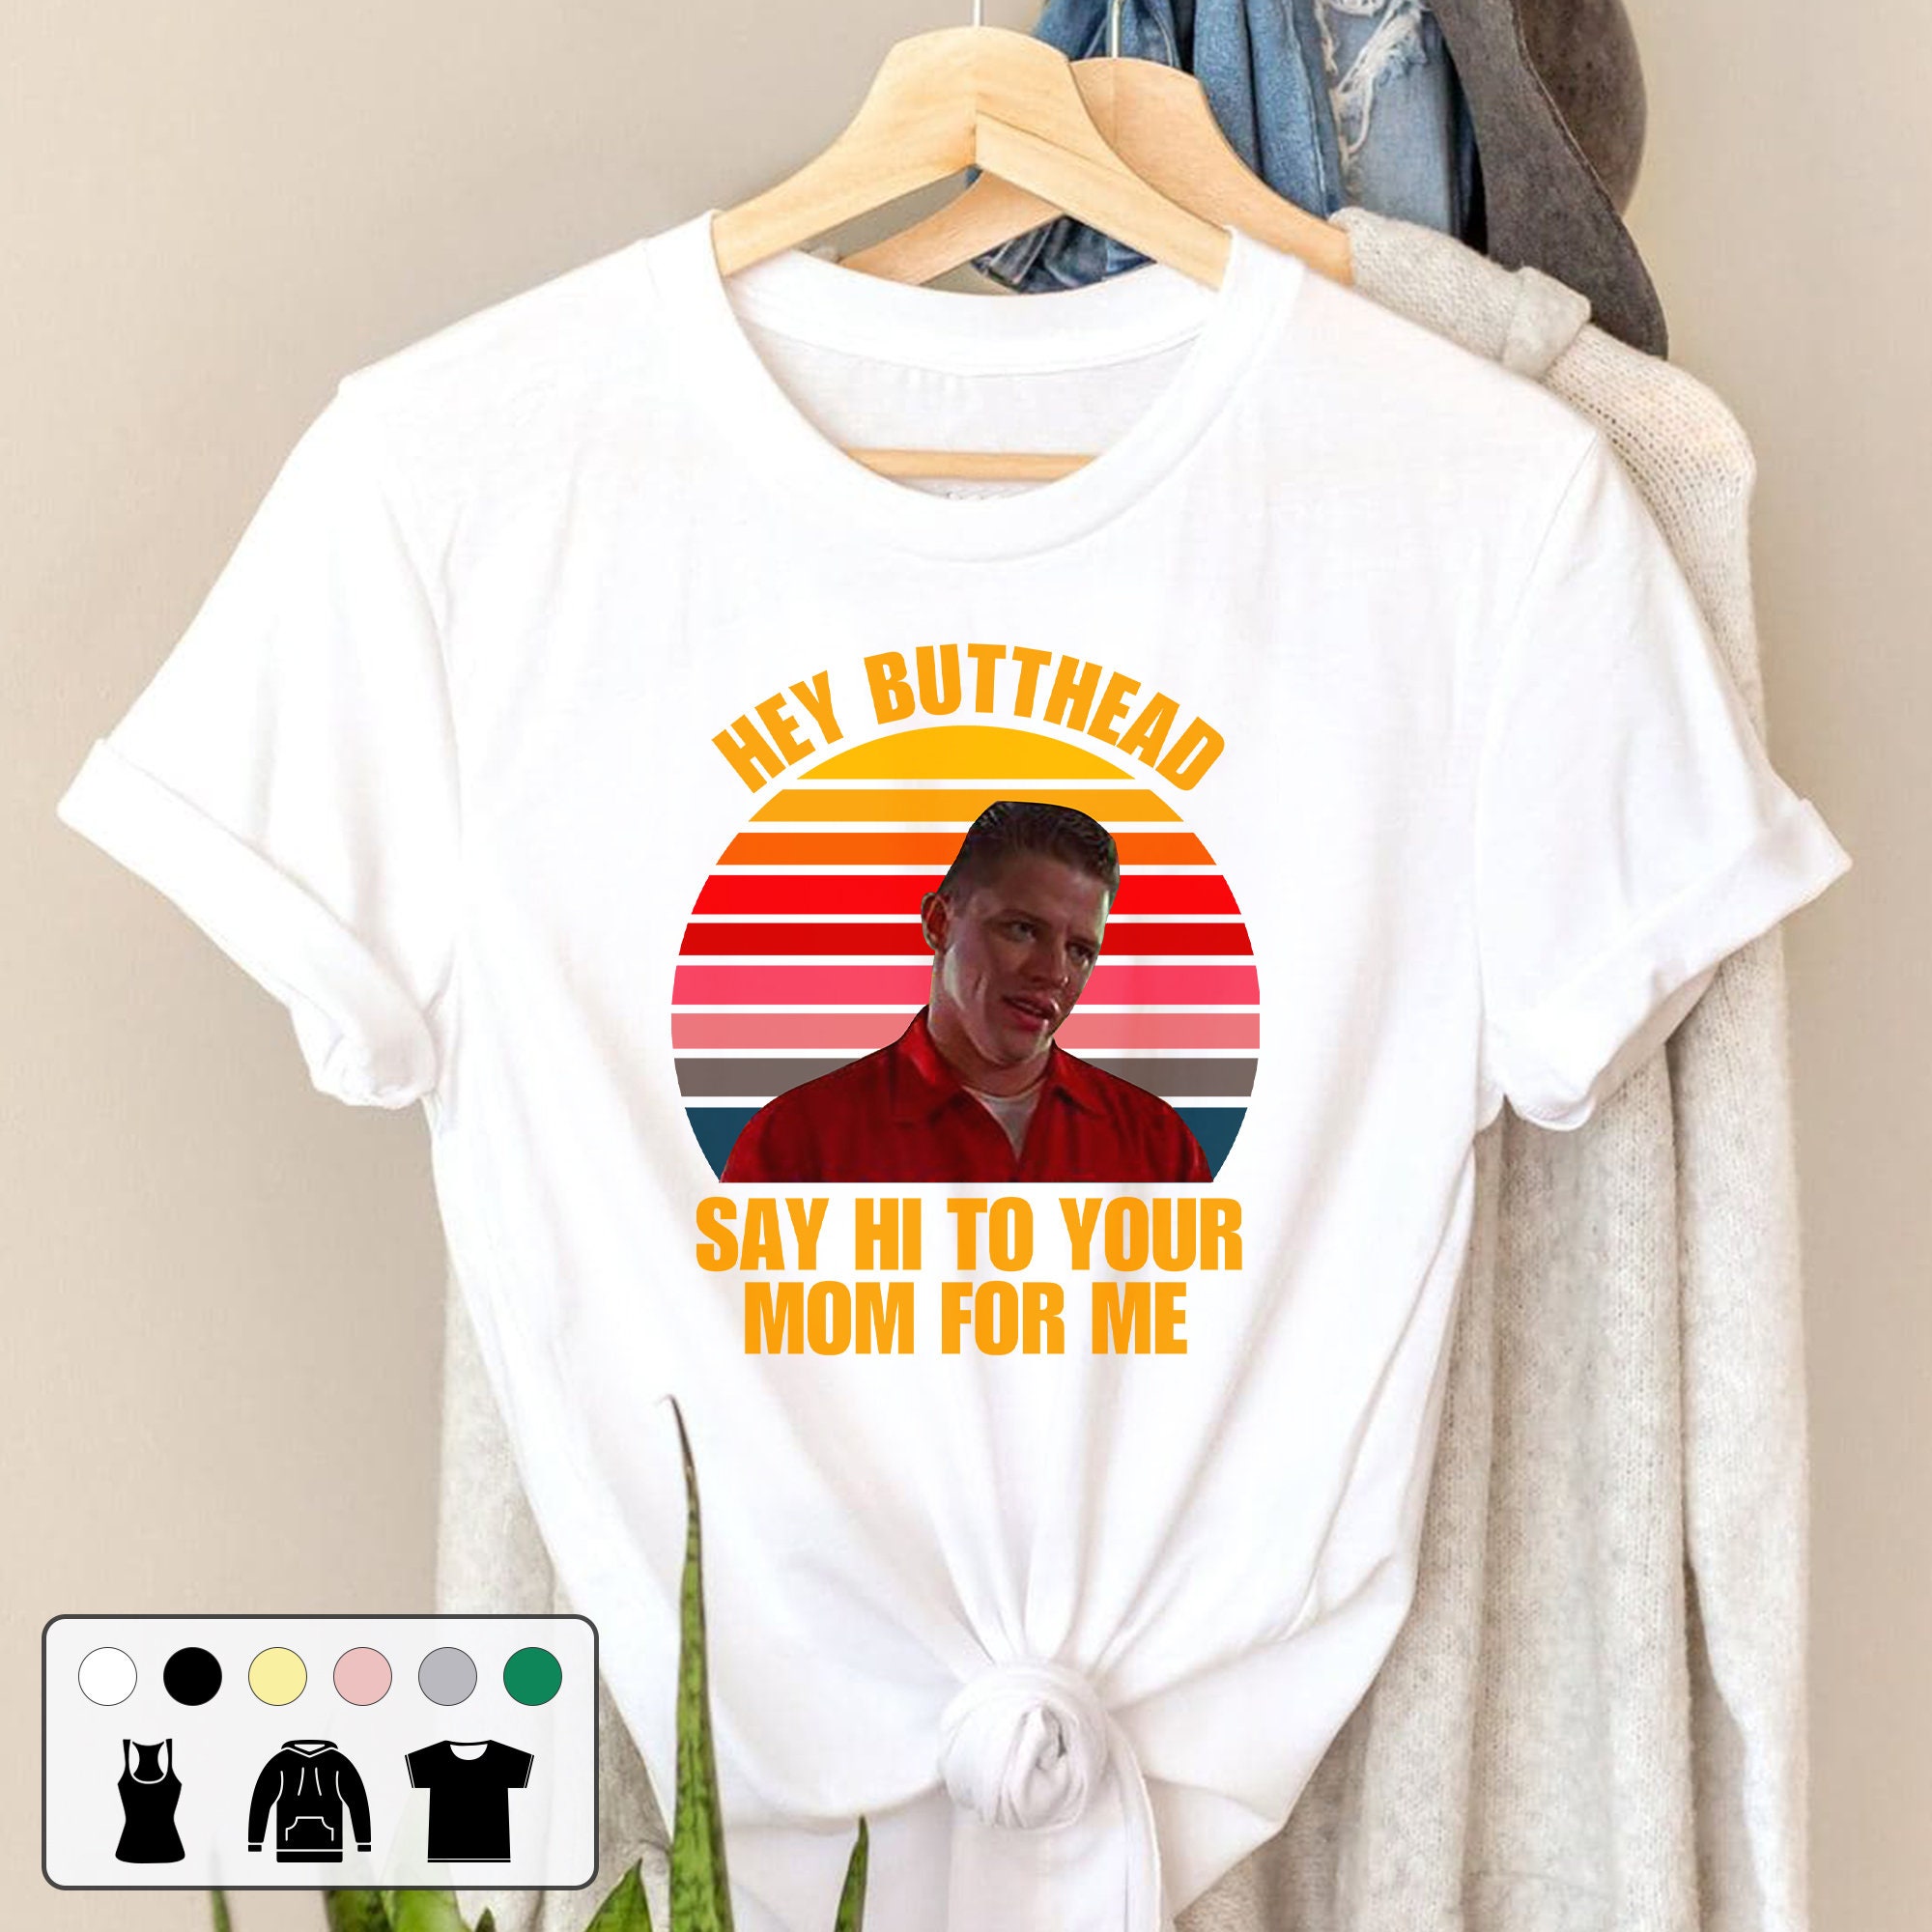 Hey Butthead Say Hi To Your Mom For Me 80s Vintage Retro Unisex T-Shirt